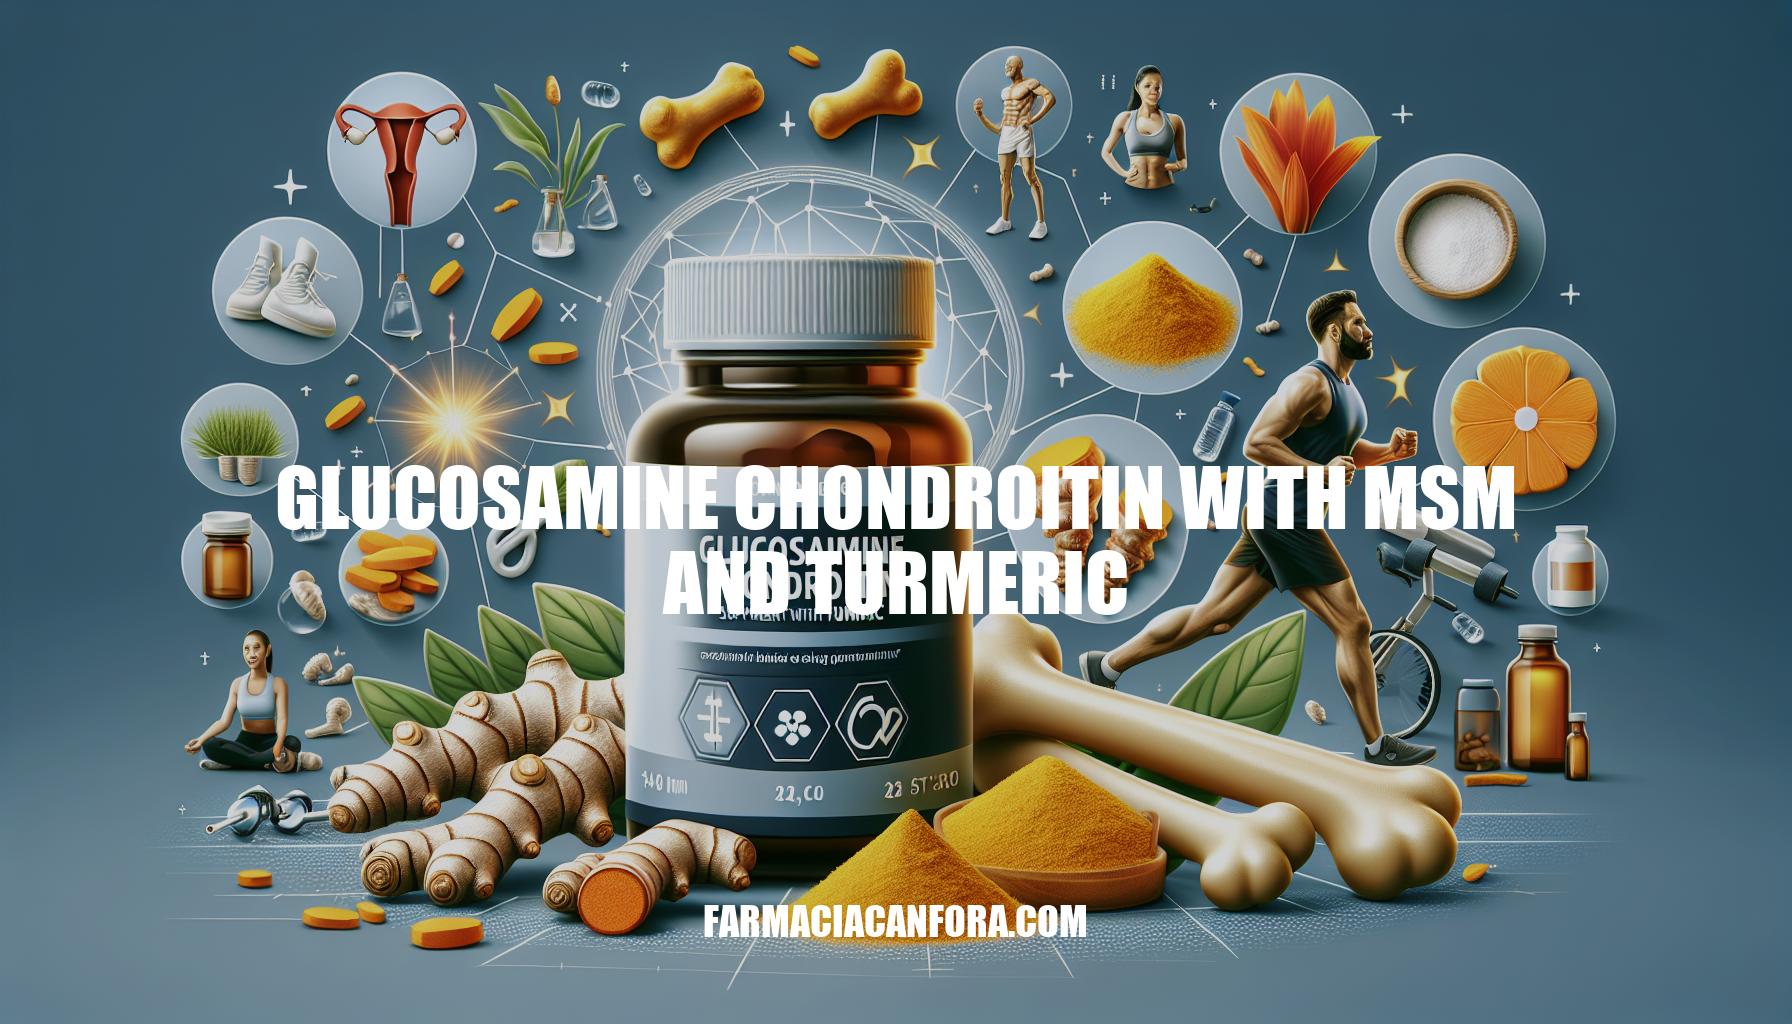 Benefits of Glucosamine Chondroitin with MSM and Turmeric Supplement